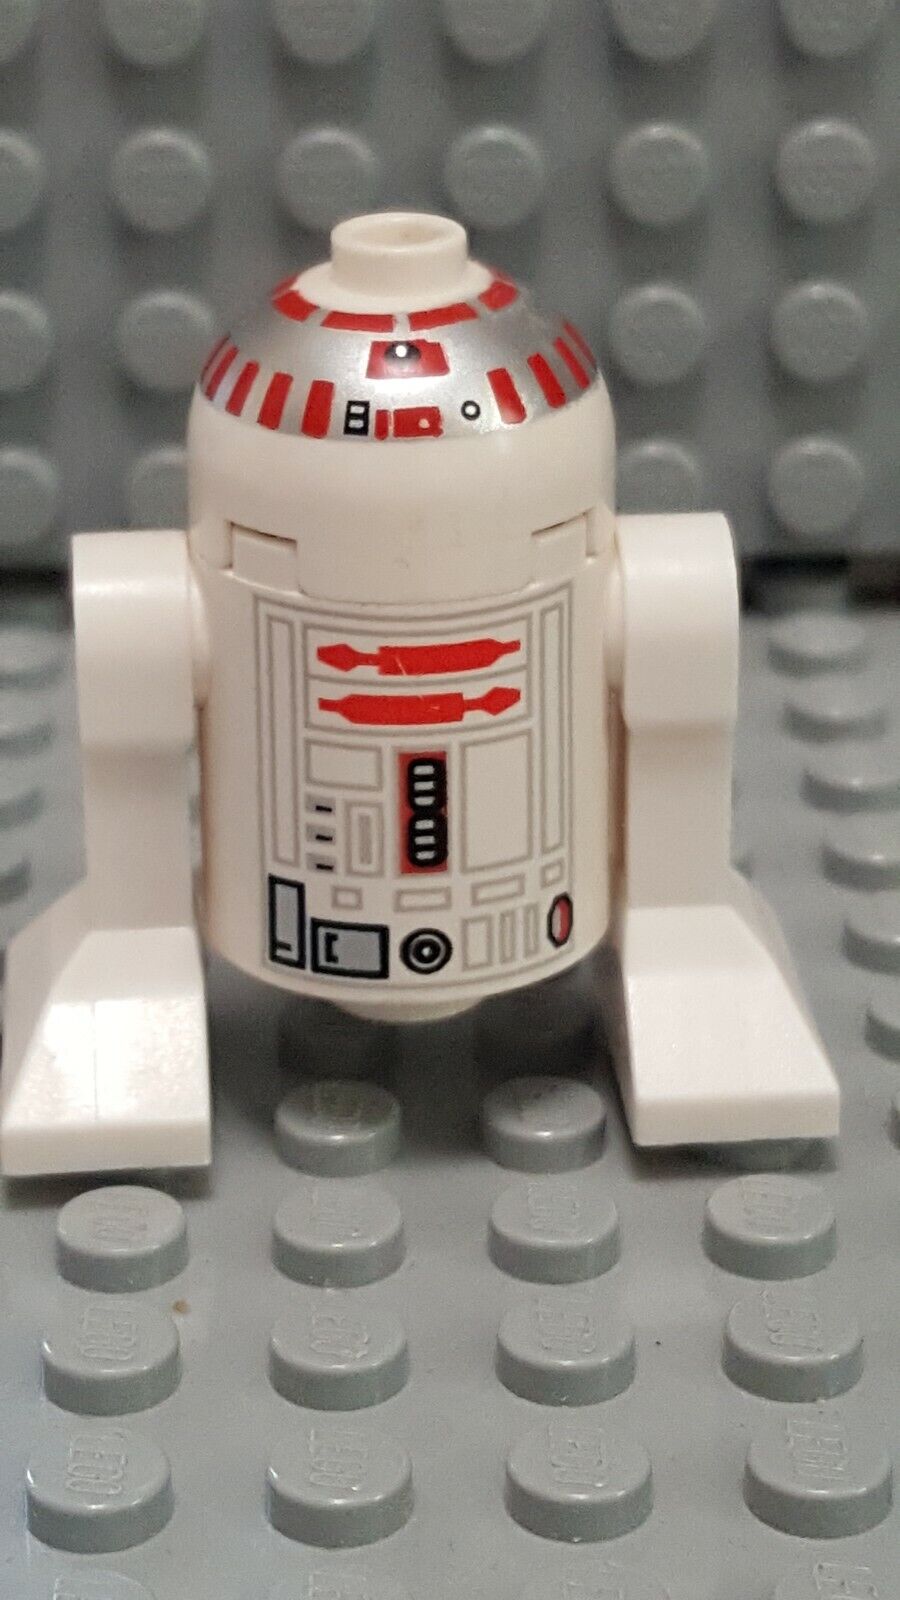 LEGO sw0029 Star Wars astromech droid R5-D4 short red stripes on dome